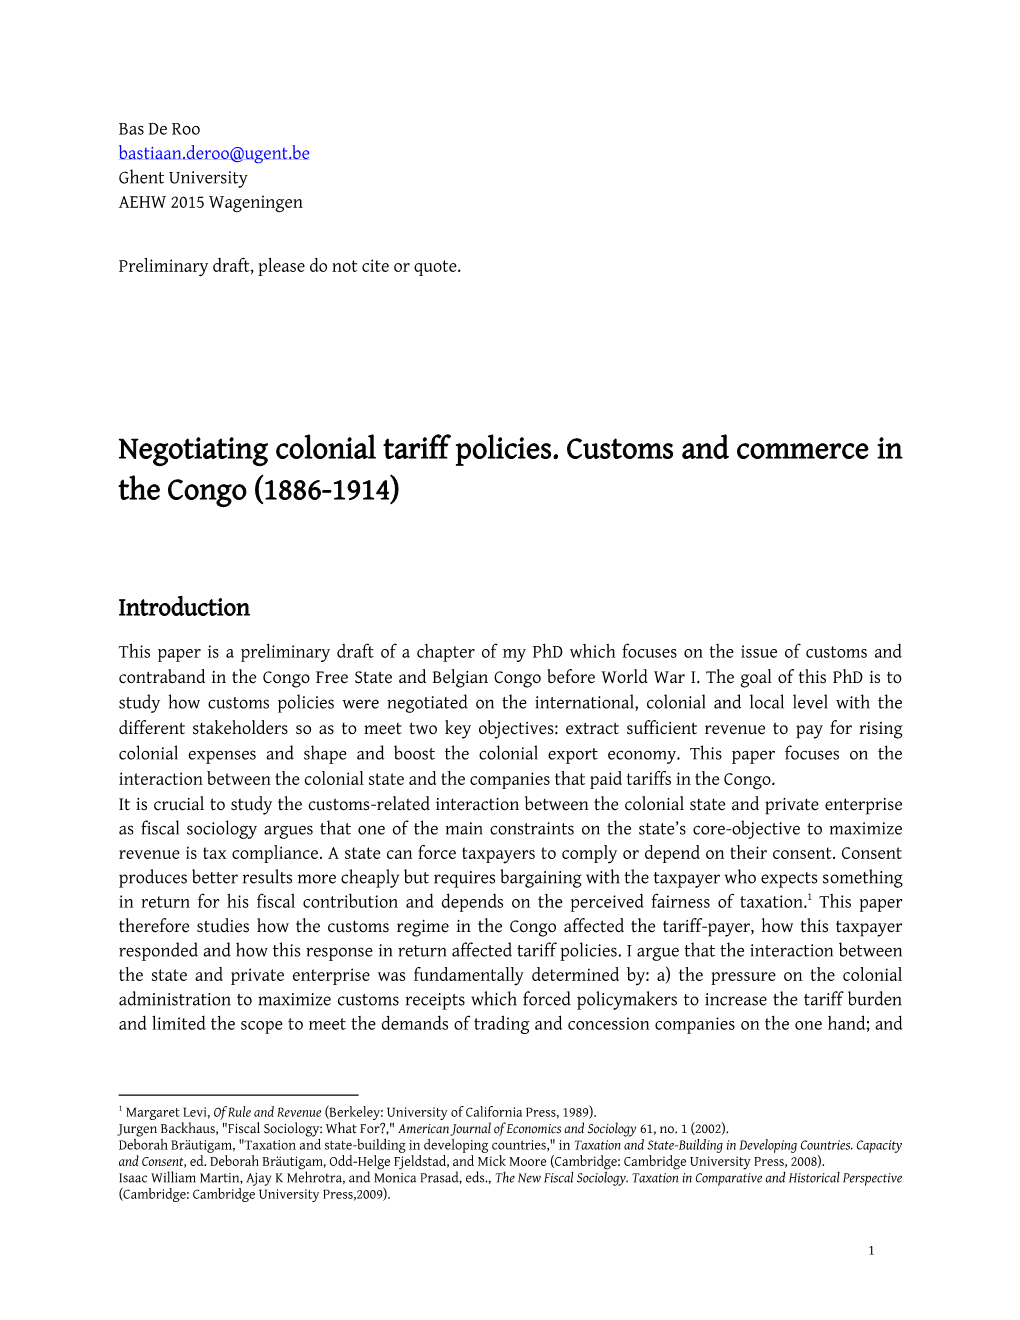 Negotiating Colonial Tariff Policies. Customs and Commerce in the Congo (1886-1914)